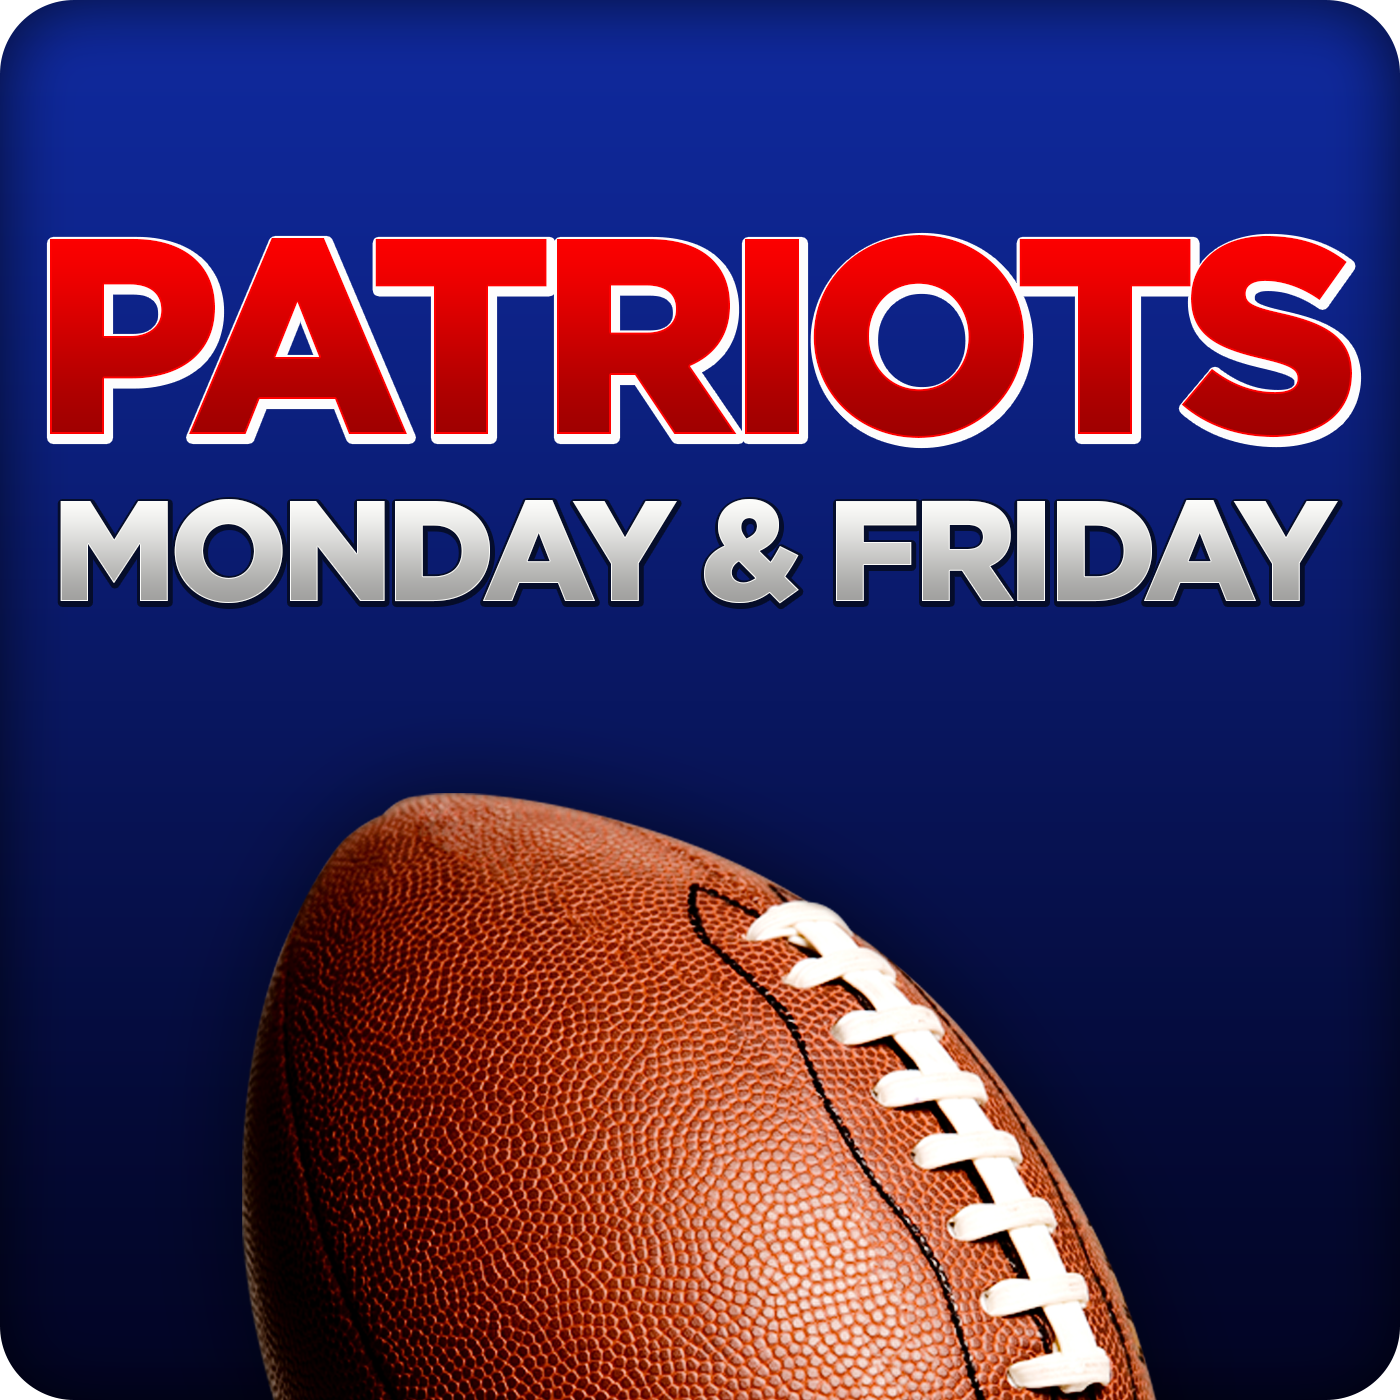 Tom E. Curran on the Patriots preparations ahead of the NFL Draft